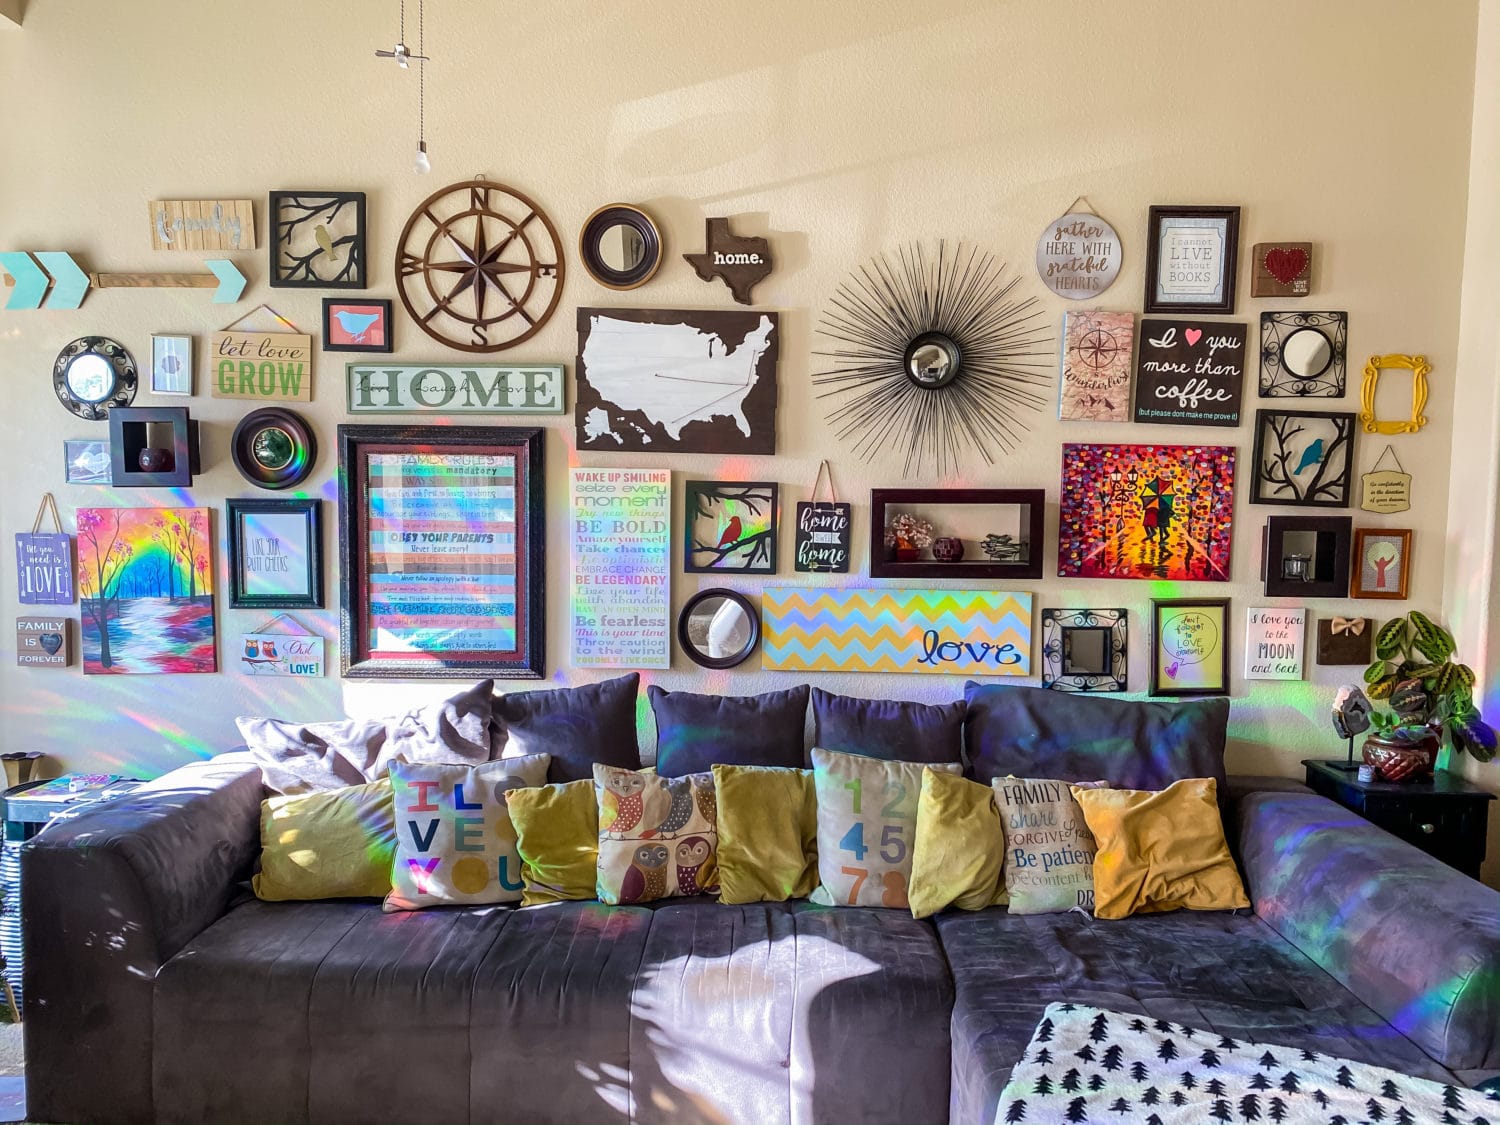 Rainbow Symphony Decals on Living Room Gallery Wall